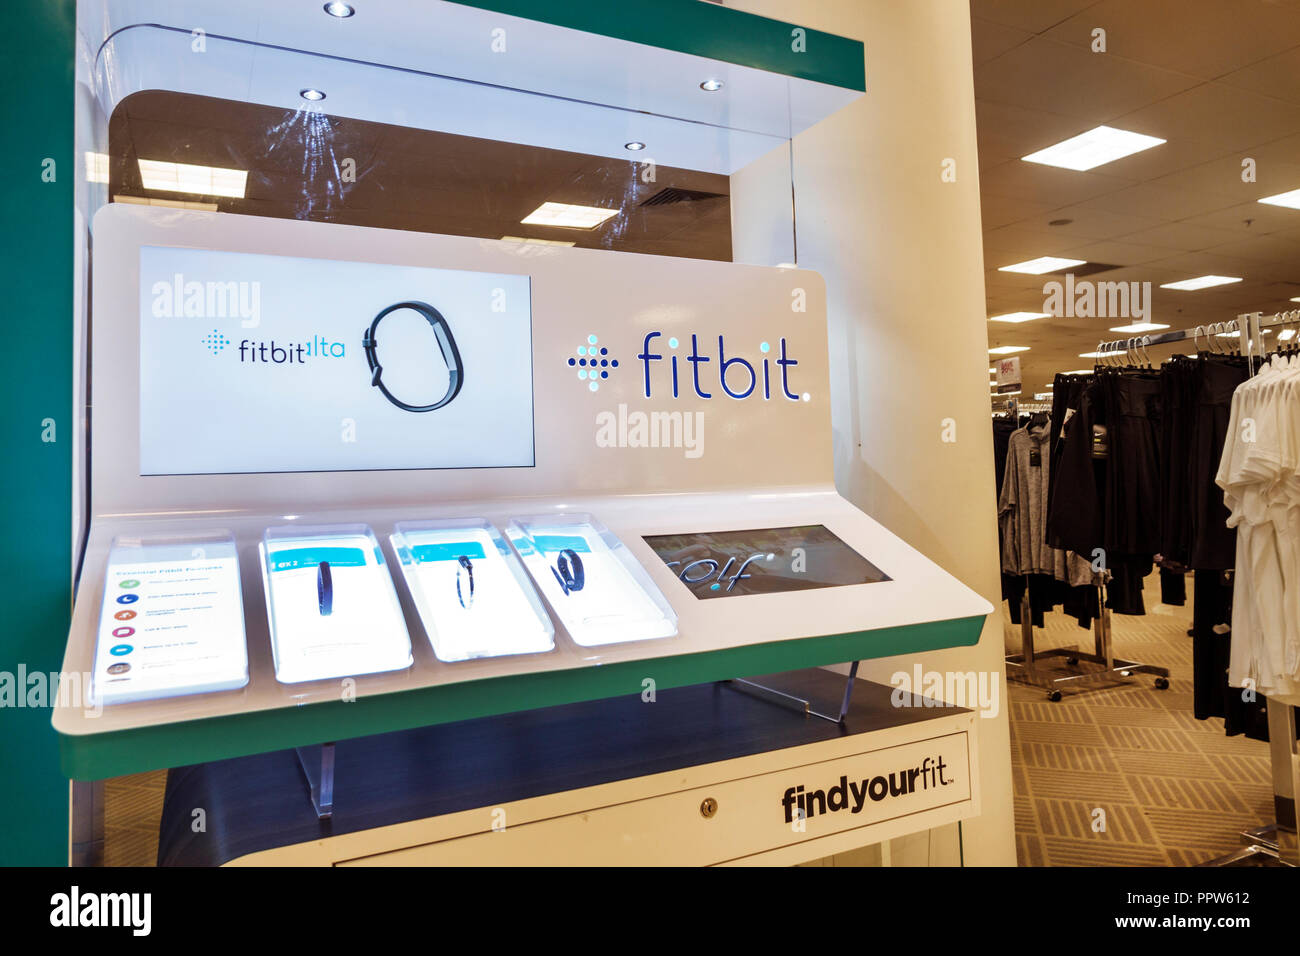 fitbit retail stores